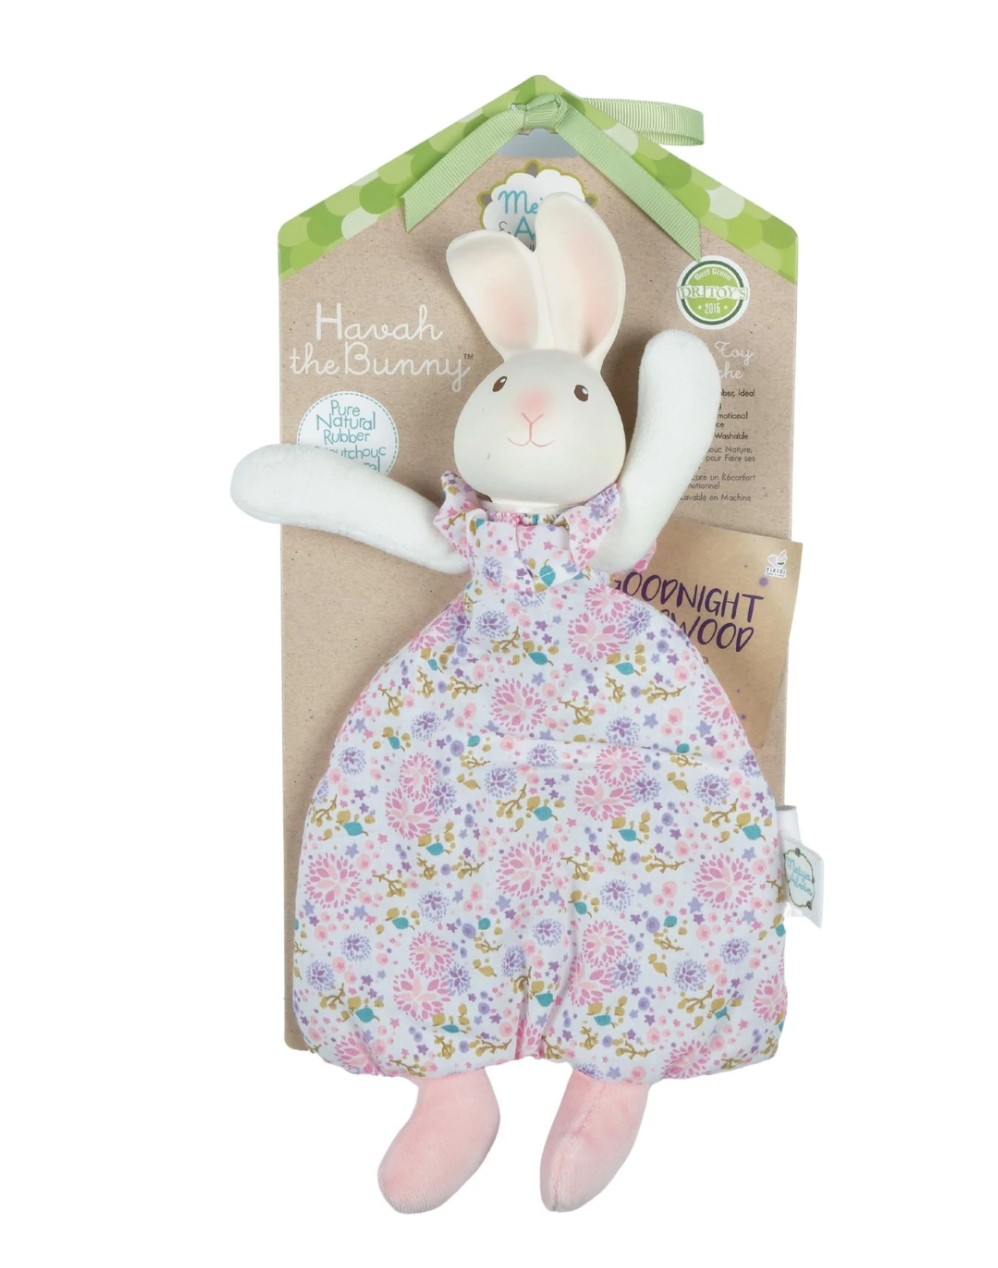 Havah, the Bunny Flat Toy